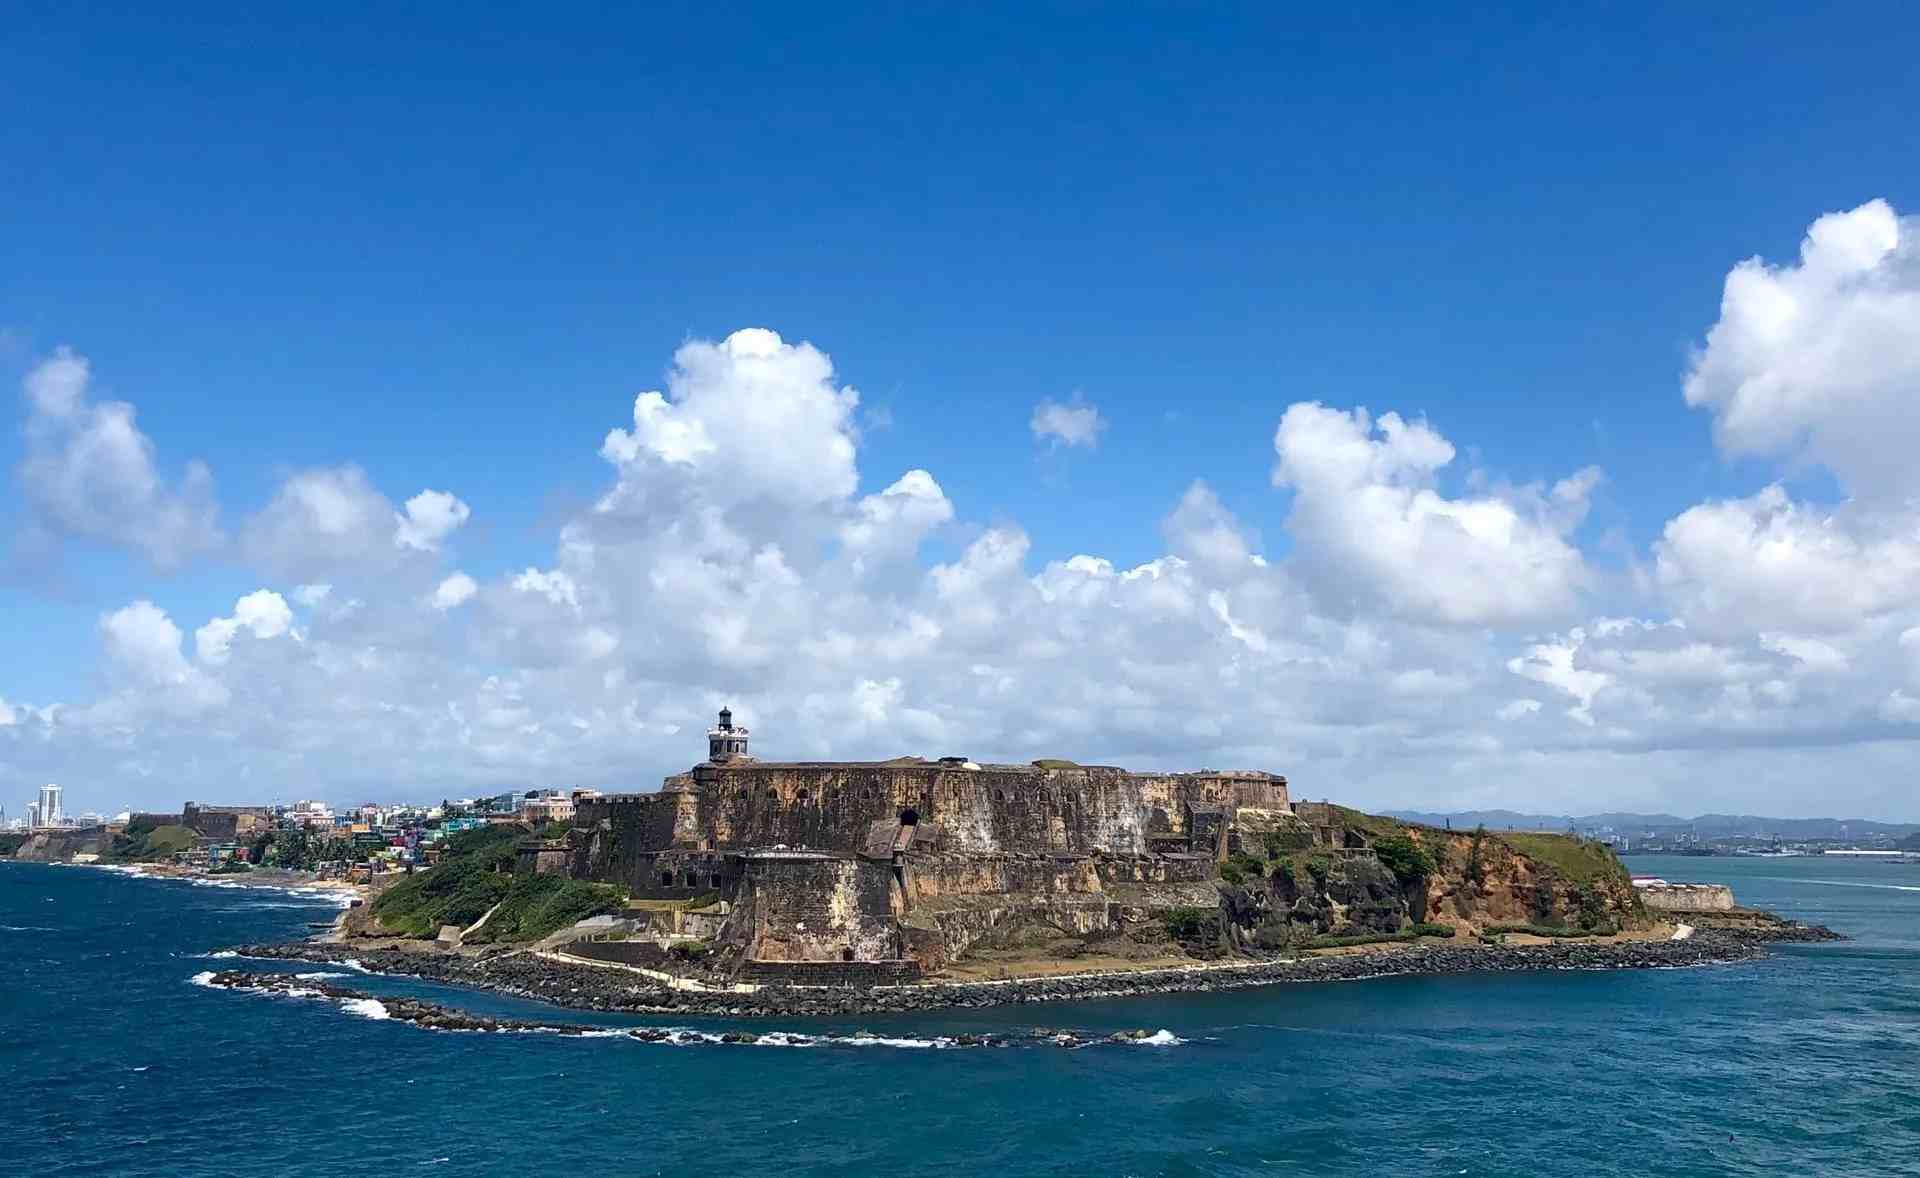 Puerto Rico is situated in the western hemisphere